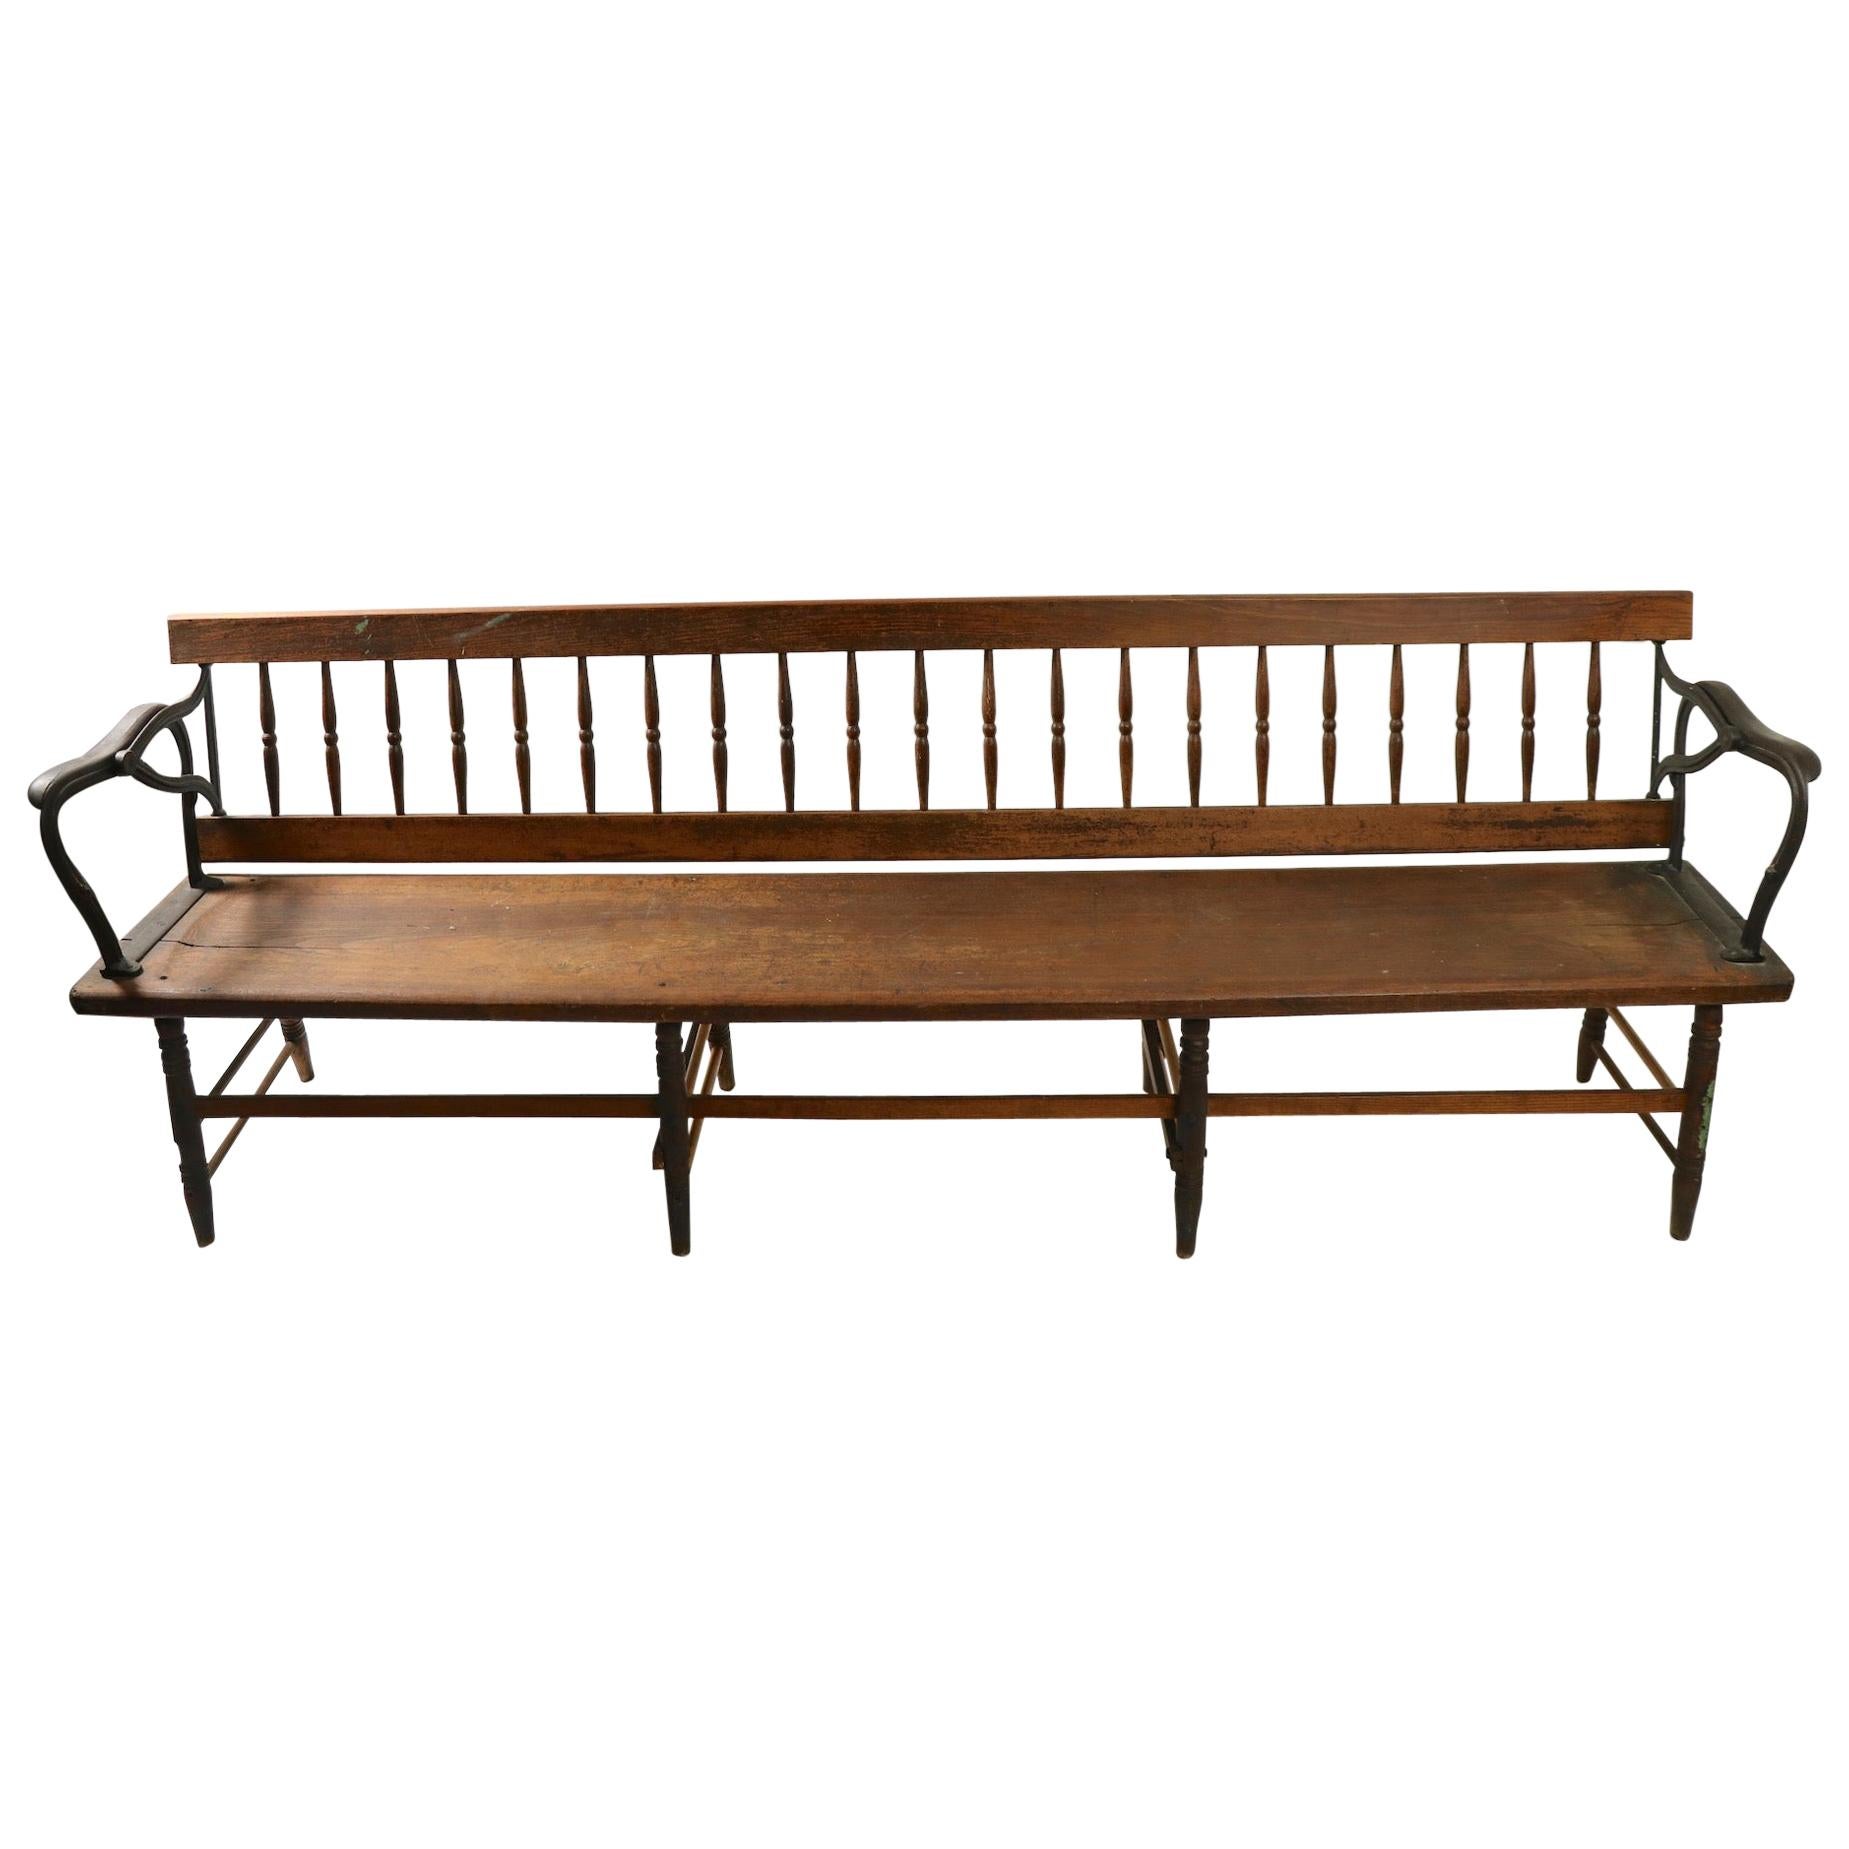  Industrial Victorian Reversible Train Station Bench